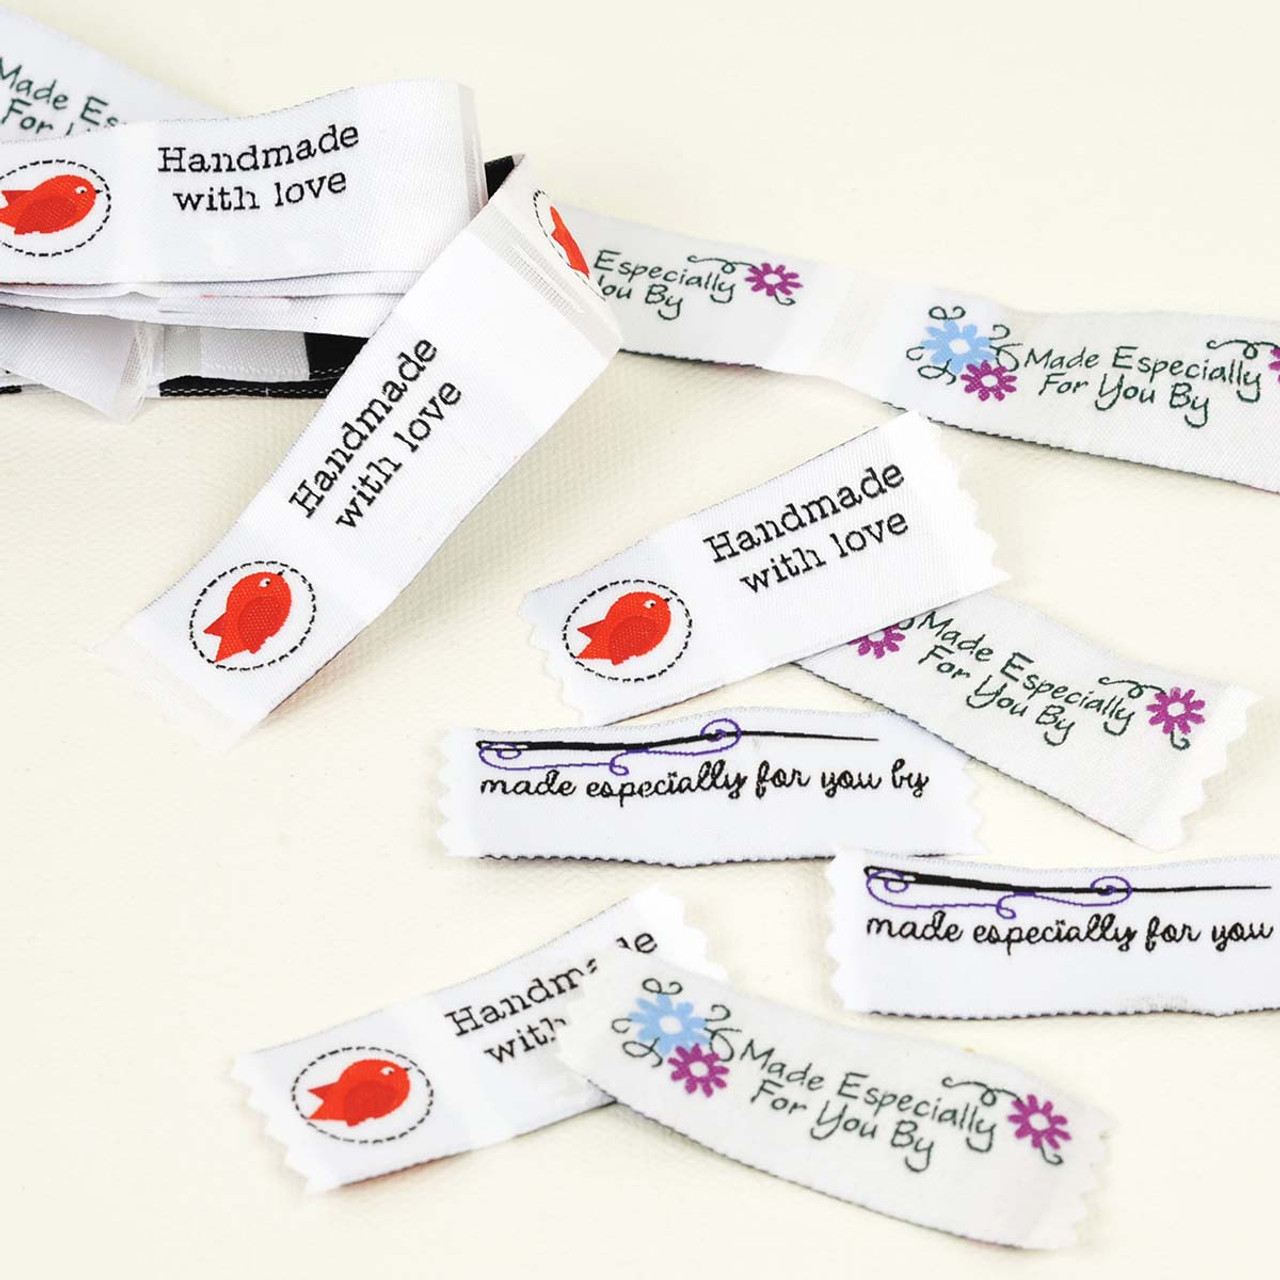 Do You -Really- Need Woven Labels for Handmade Items?